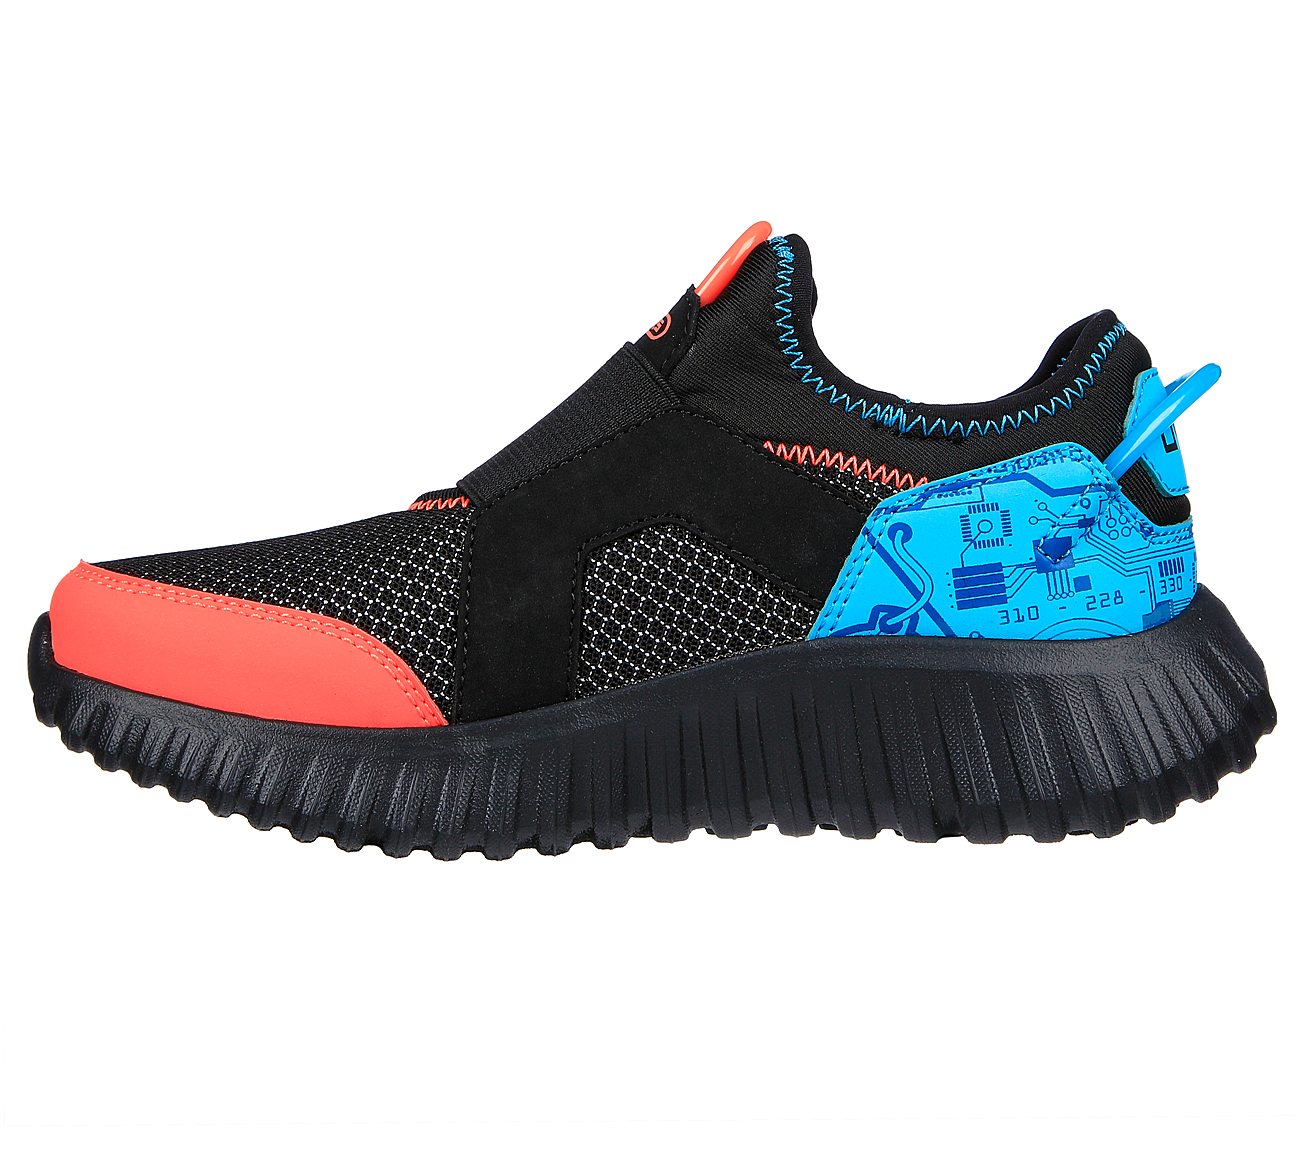 DEPTH CHARGE 2.0-DOUBLE POINT, BLACK/MULTI Footwear Left View